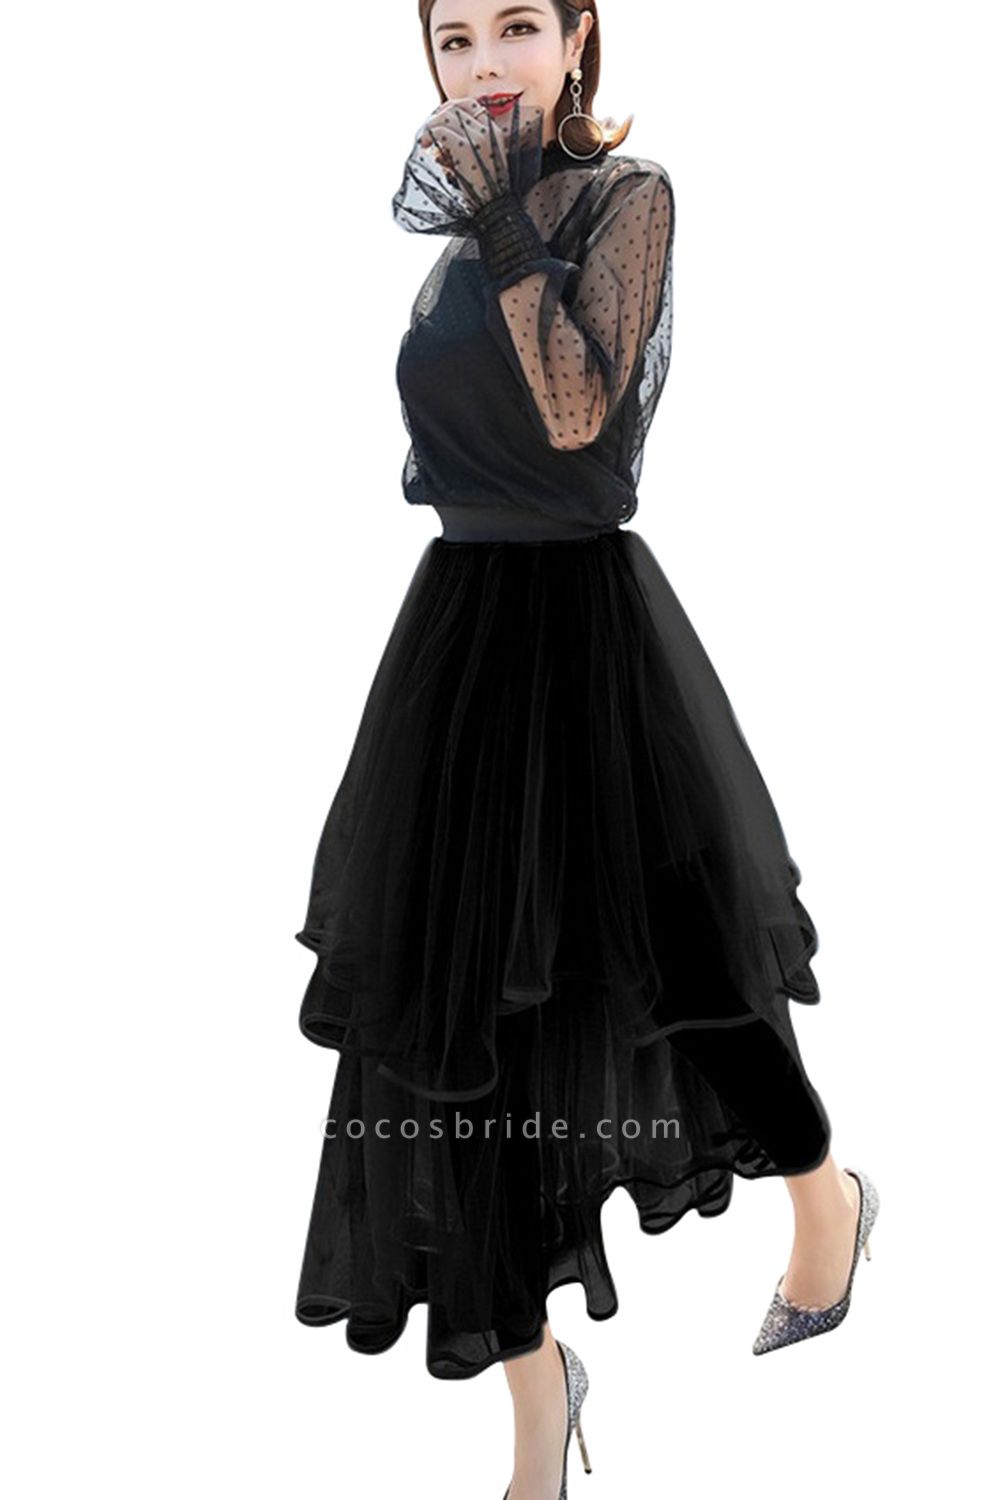 Black Petticoat with Layers